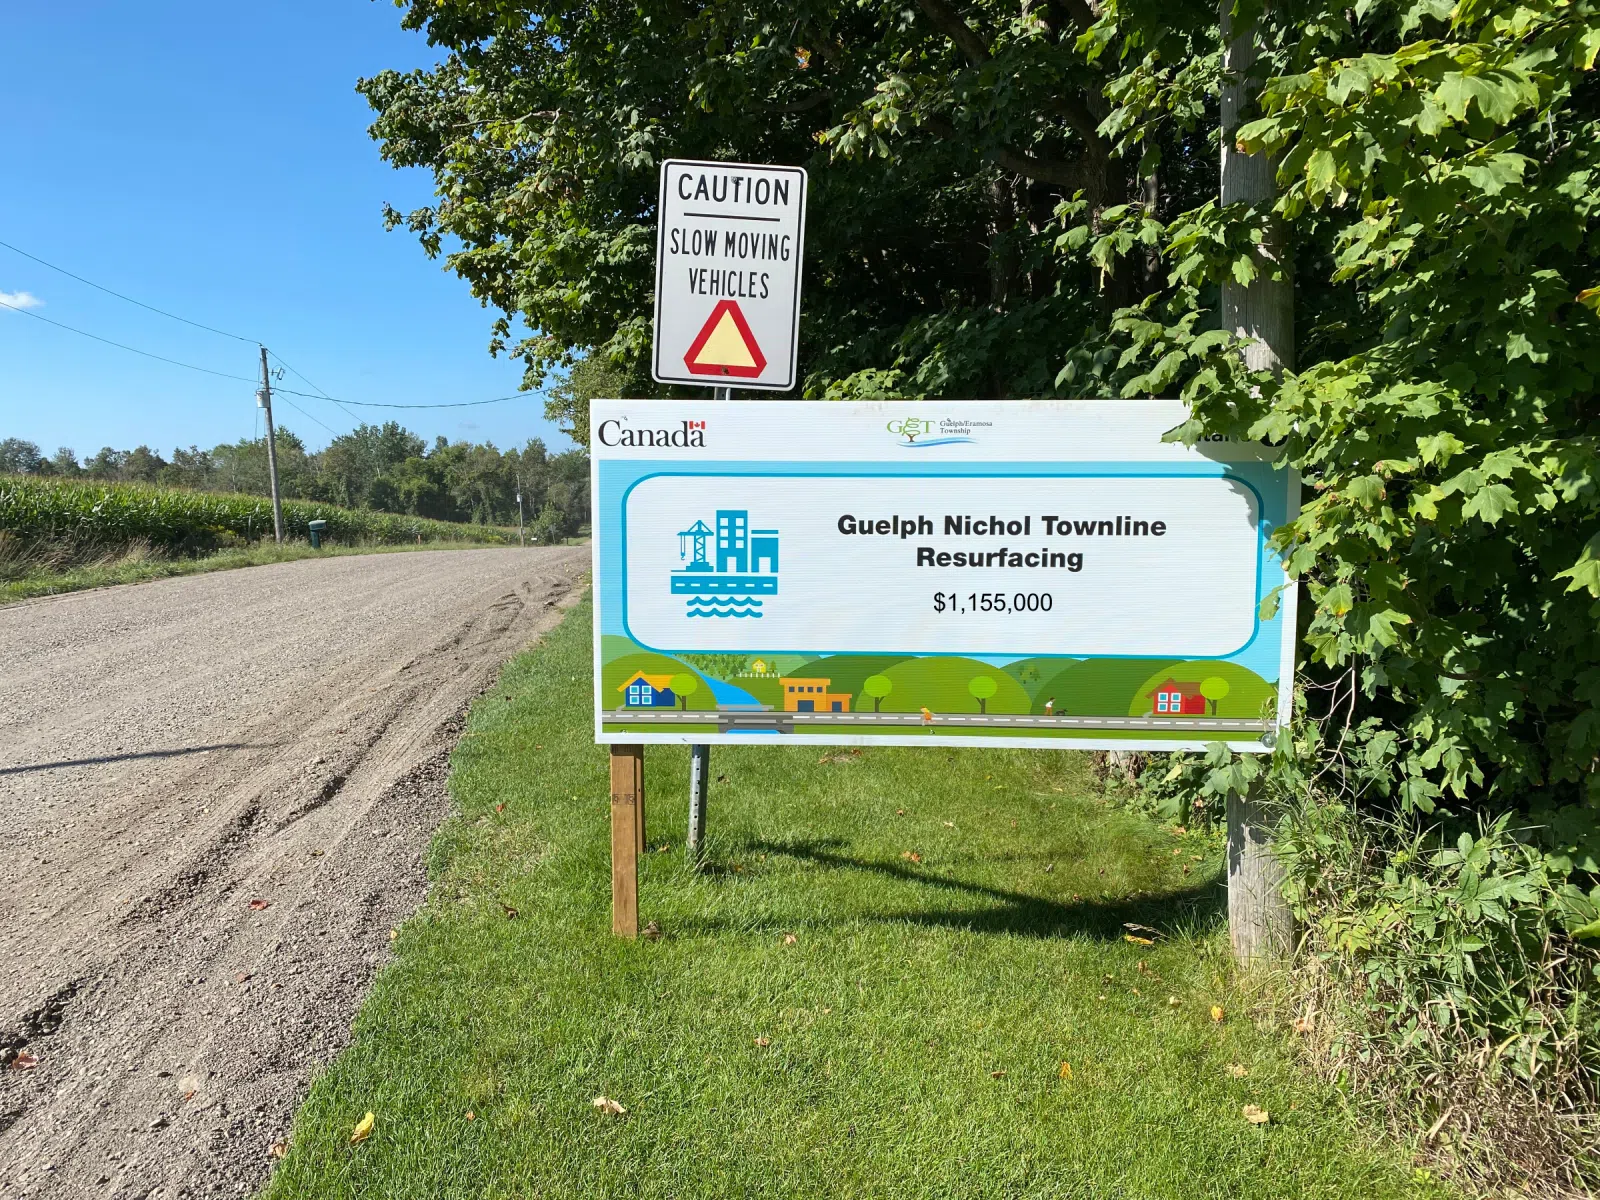 Guelph/Eramosa Township Resurfaces 3.8km Section of Guelph Nichol Townline